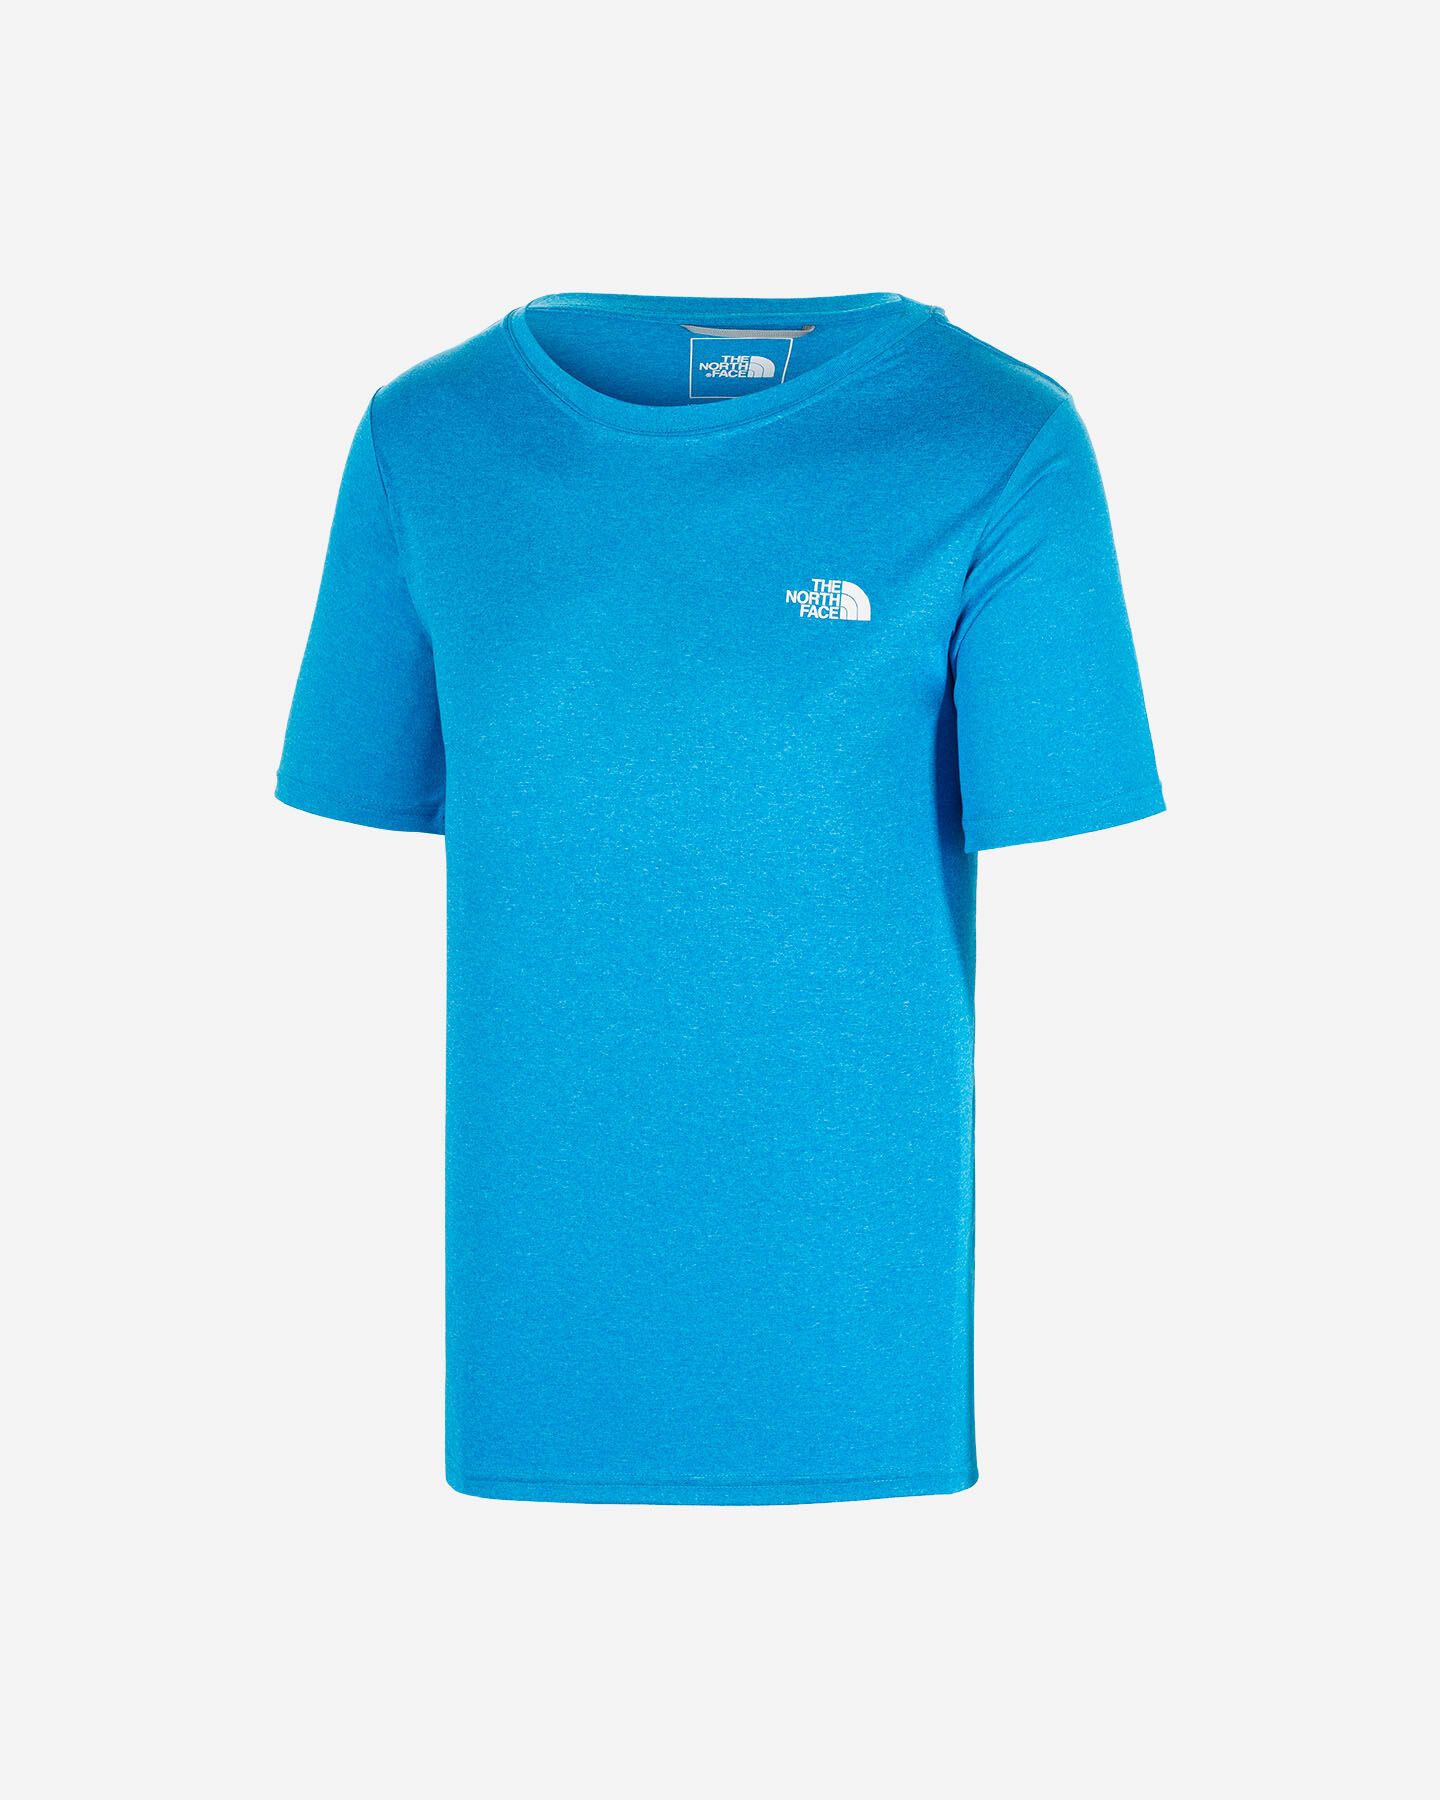  T-Shirt THE NORTH FACE REAXION AMP M S5182554|W1H|XS scatto 0